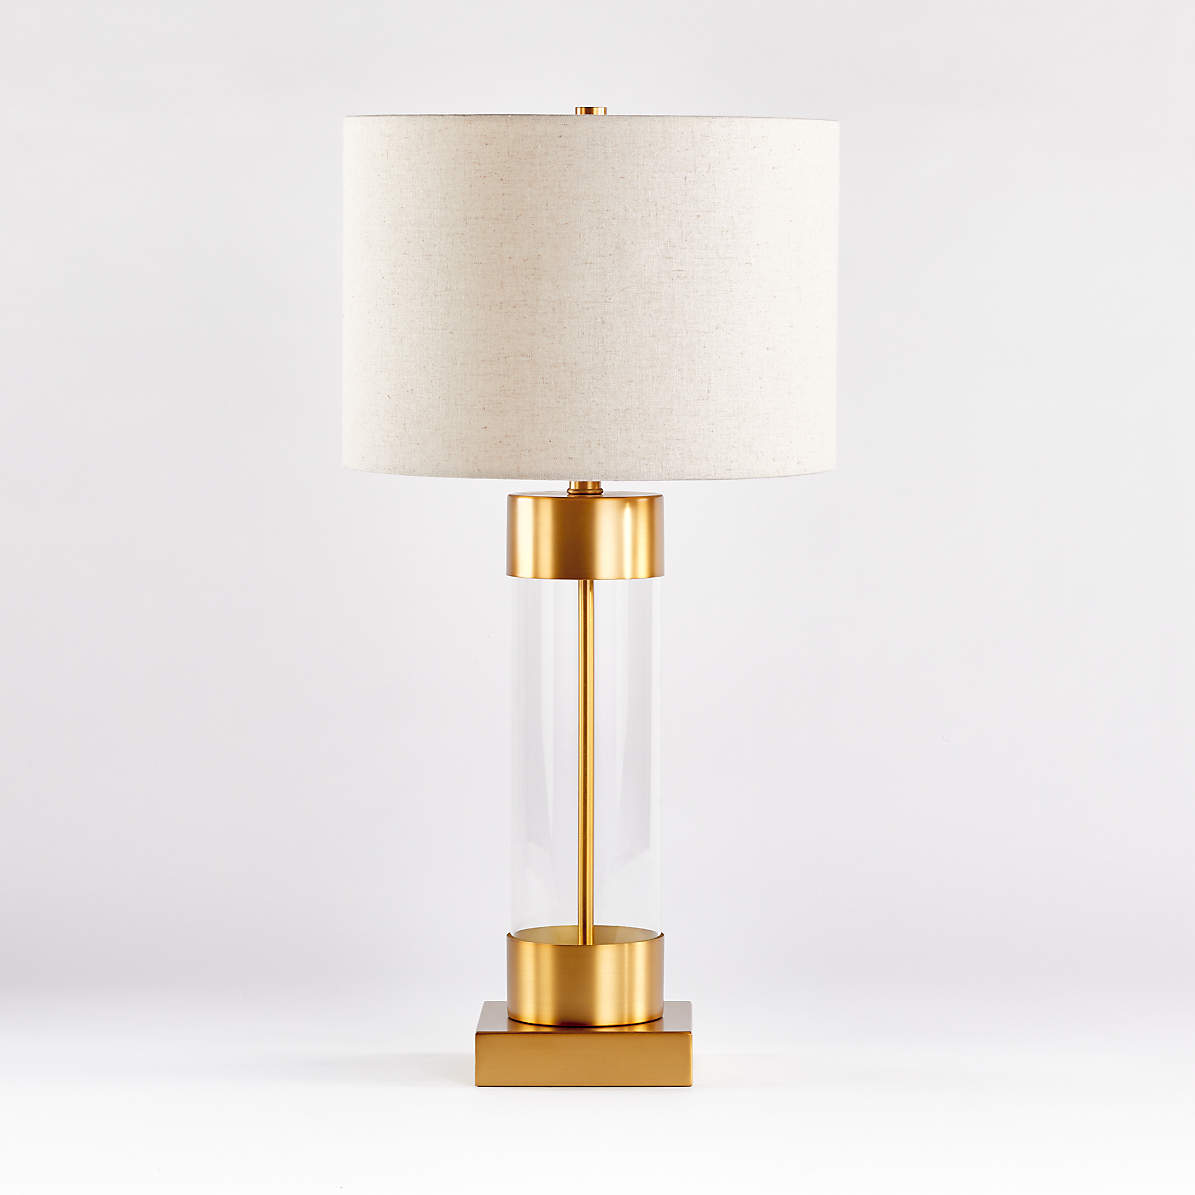 Avenue Brass Table Lamp With Usb Port, Tall Table Lamp With Usb Port